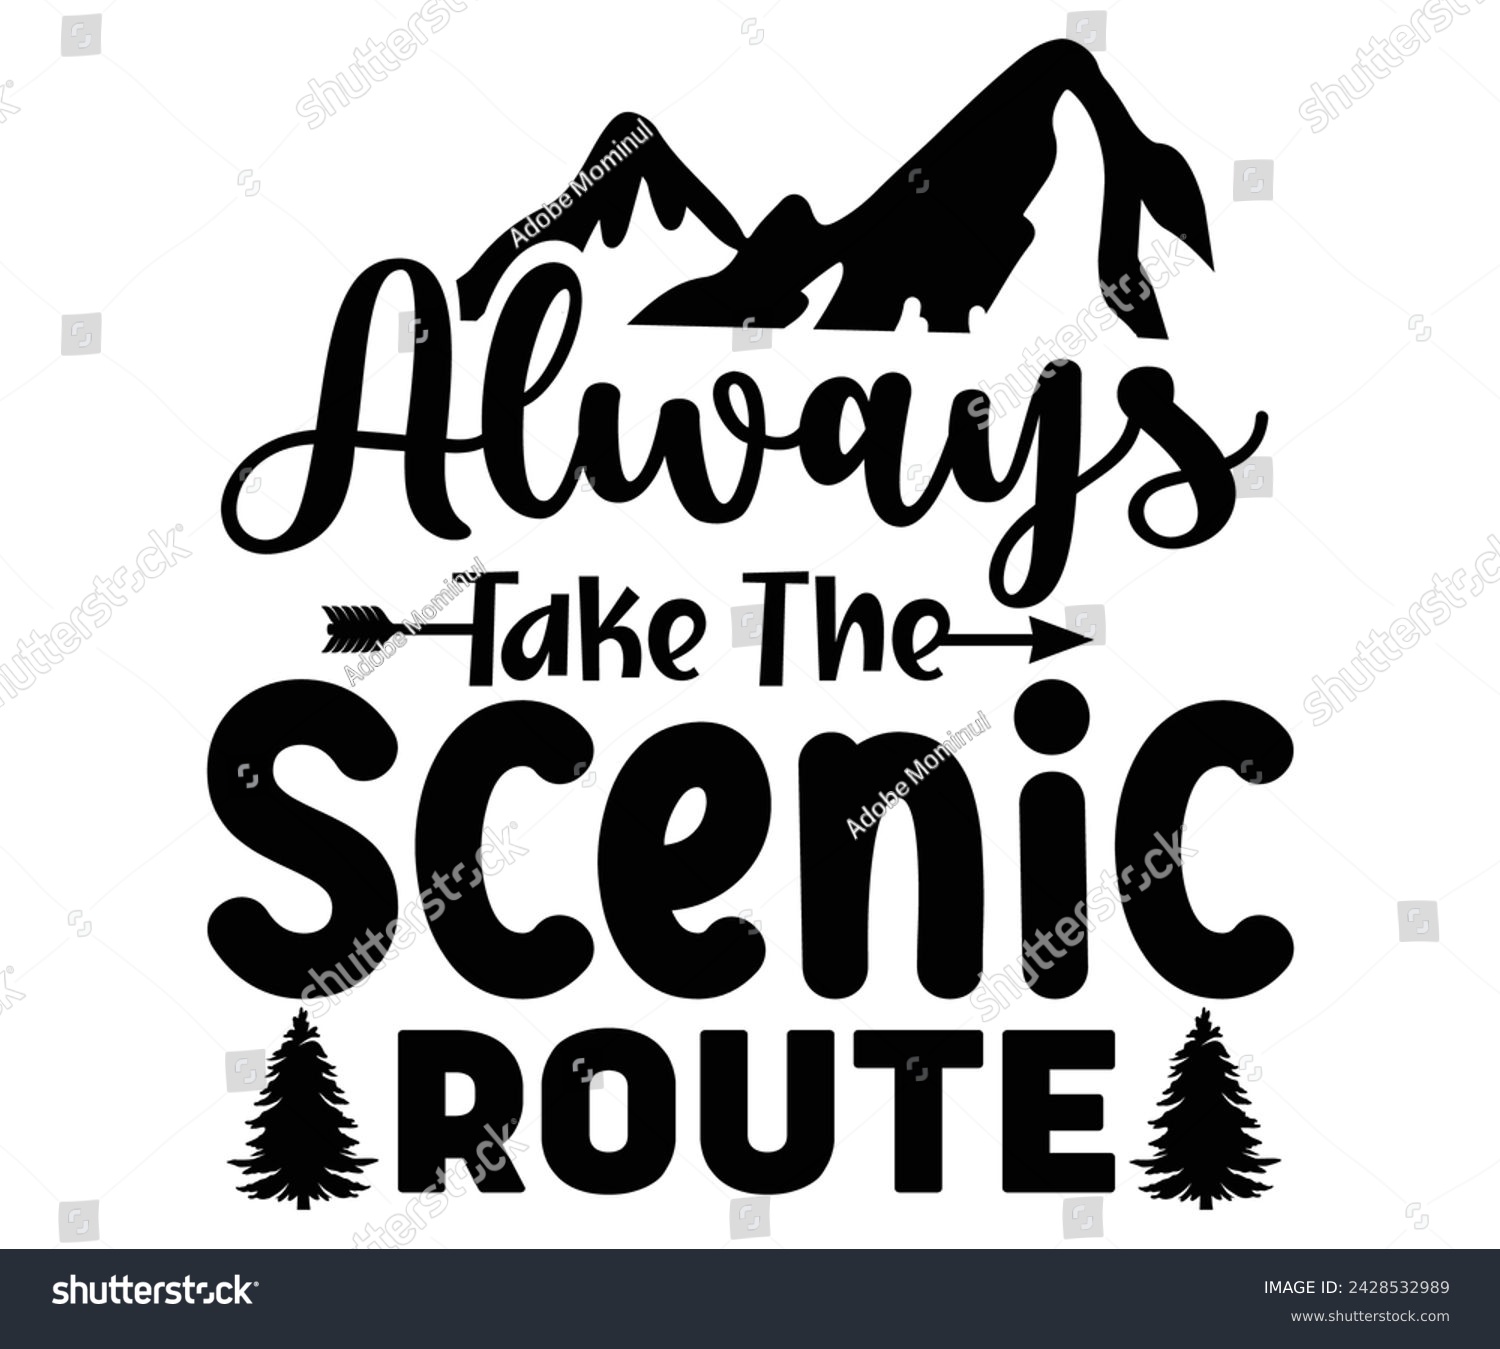 SVG of Always Take The Scenic Route Svg,Happy Camper Svg,Camping Svg,Adventure Svg,Hiking Svg,Camp Saying,Camp Life Svg,Svg Cut Files, Png,Mountain T-shirt,Instant Download svg